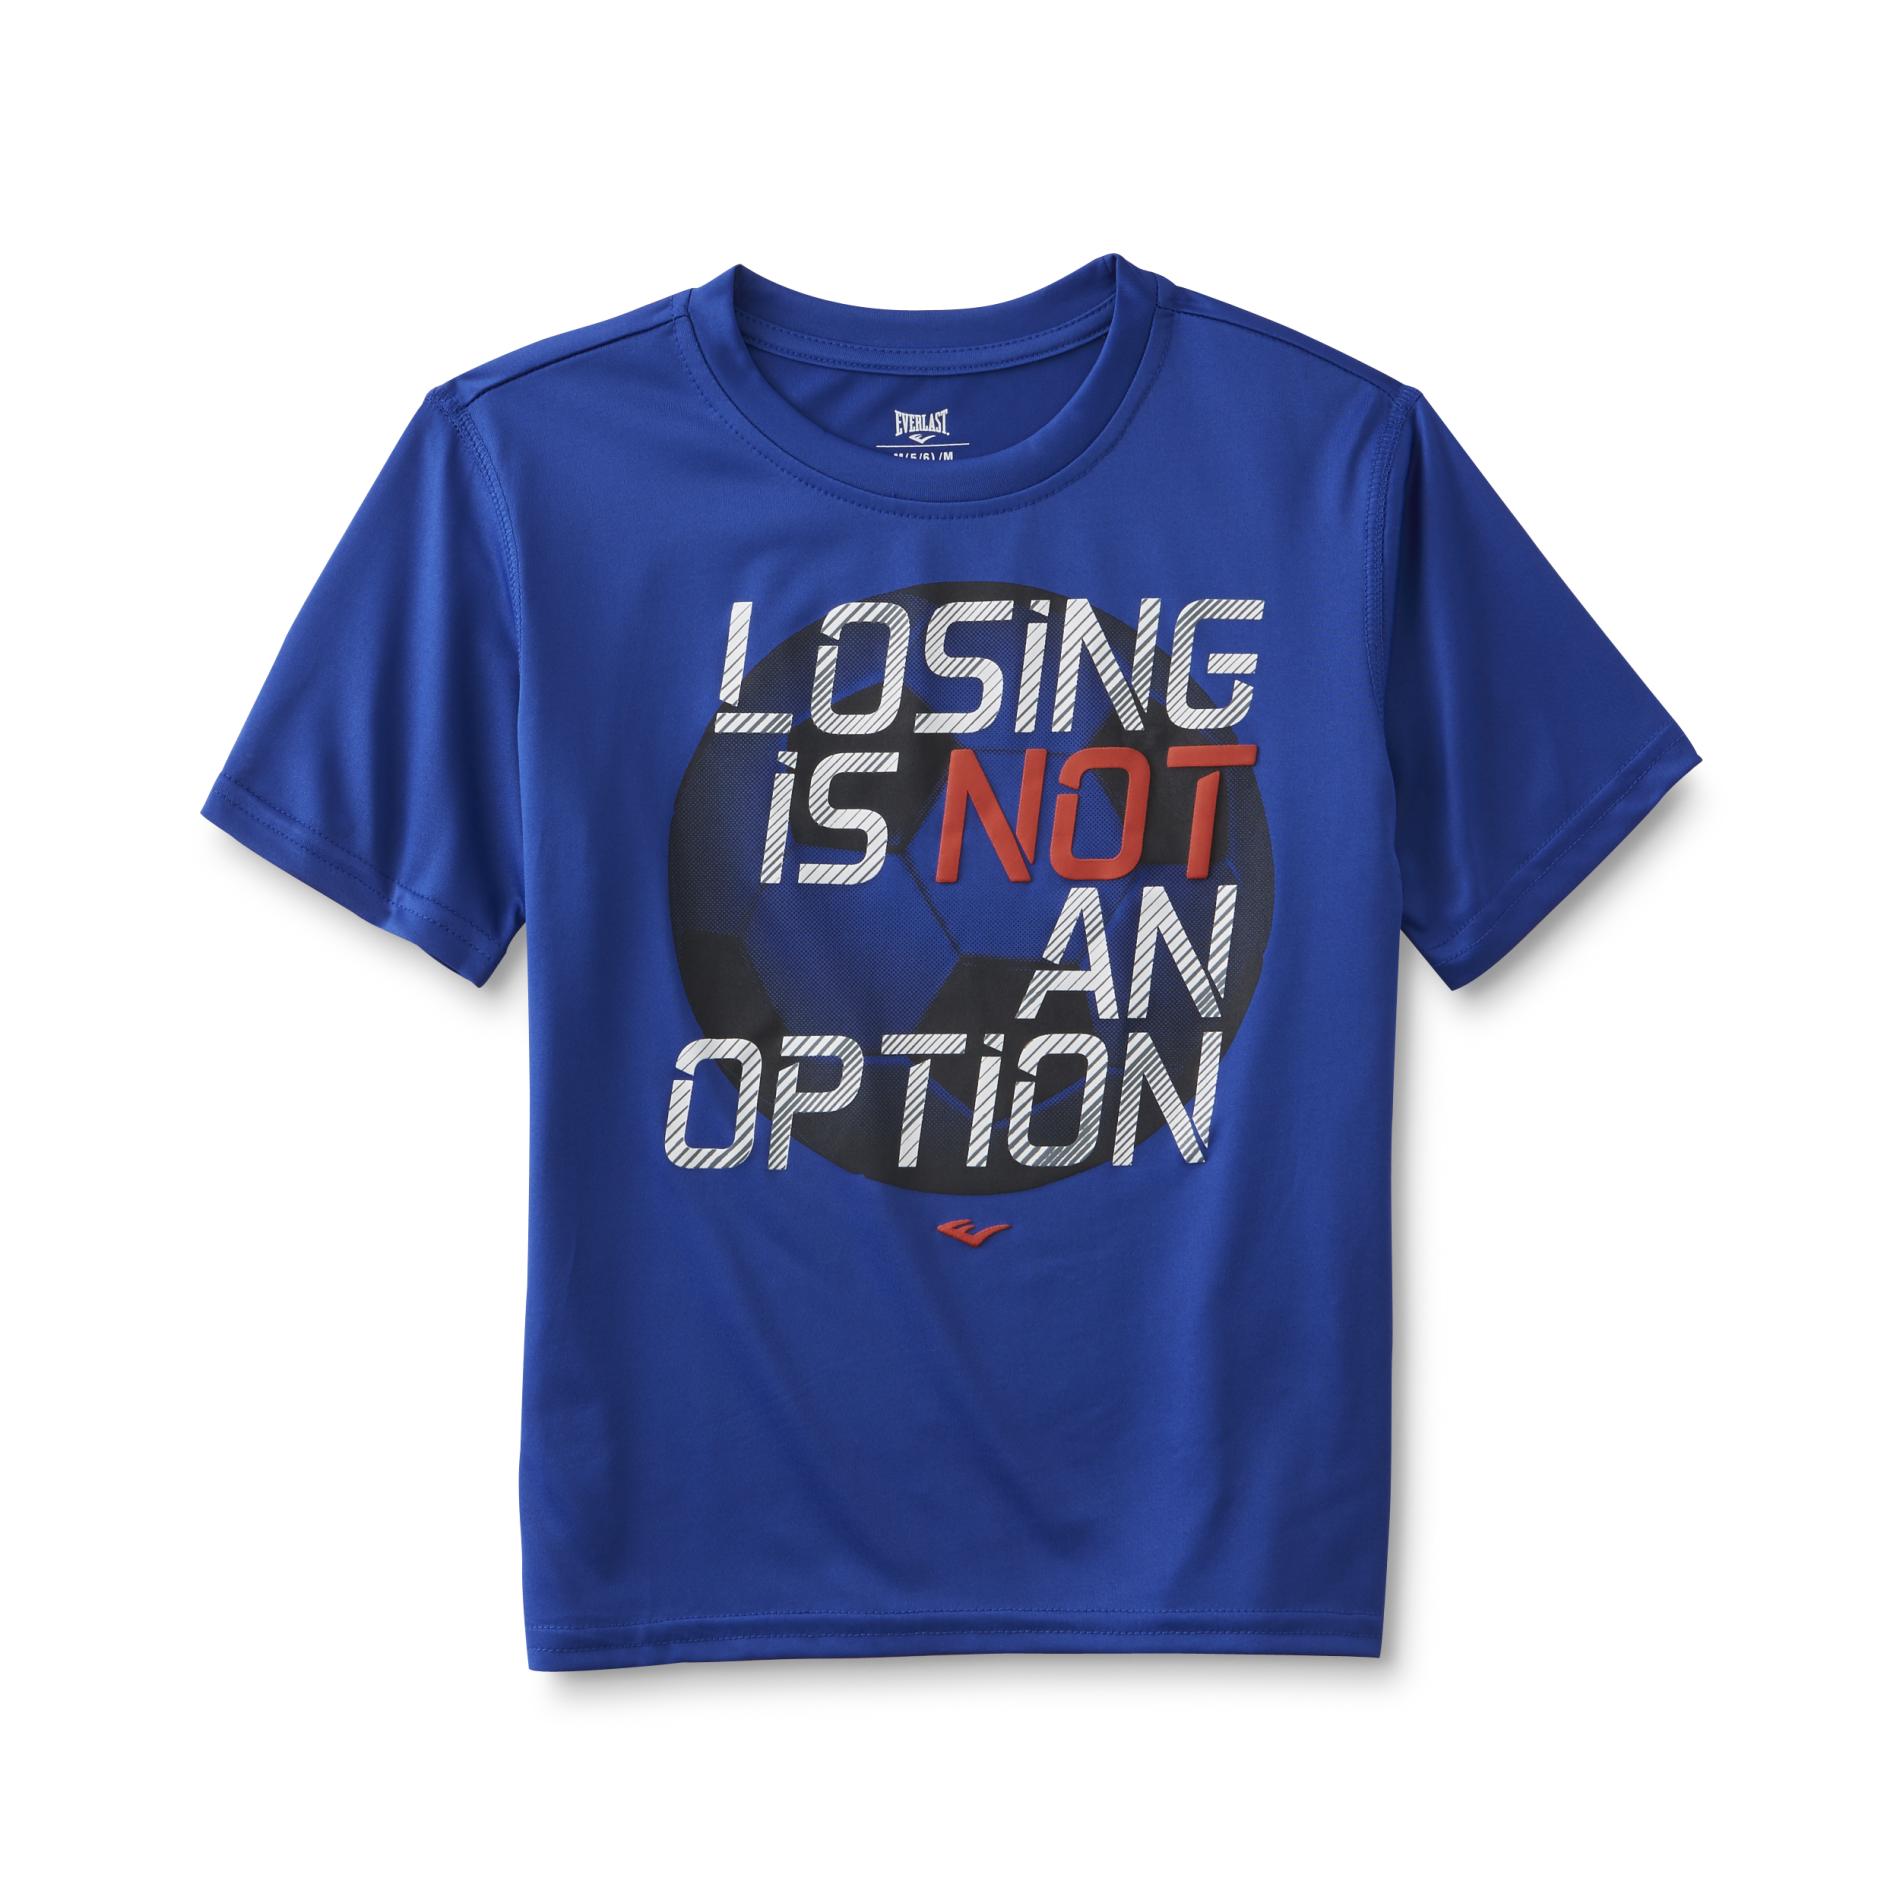 Everlast&reg; Boy's Graphic Athletic T-Shirt - Losing Is Not An Option